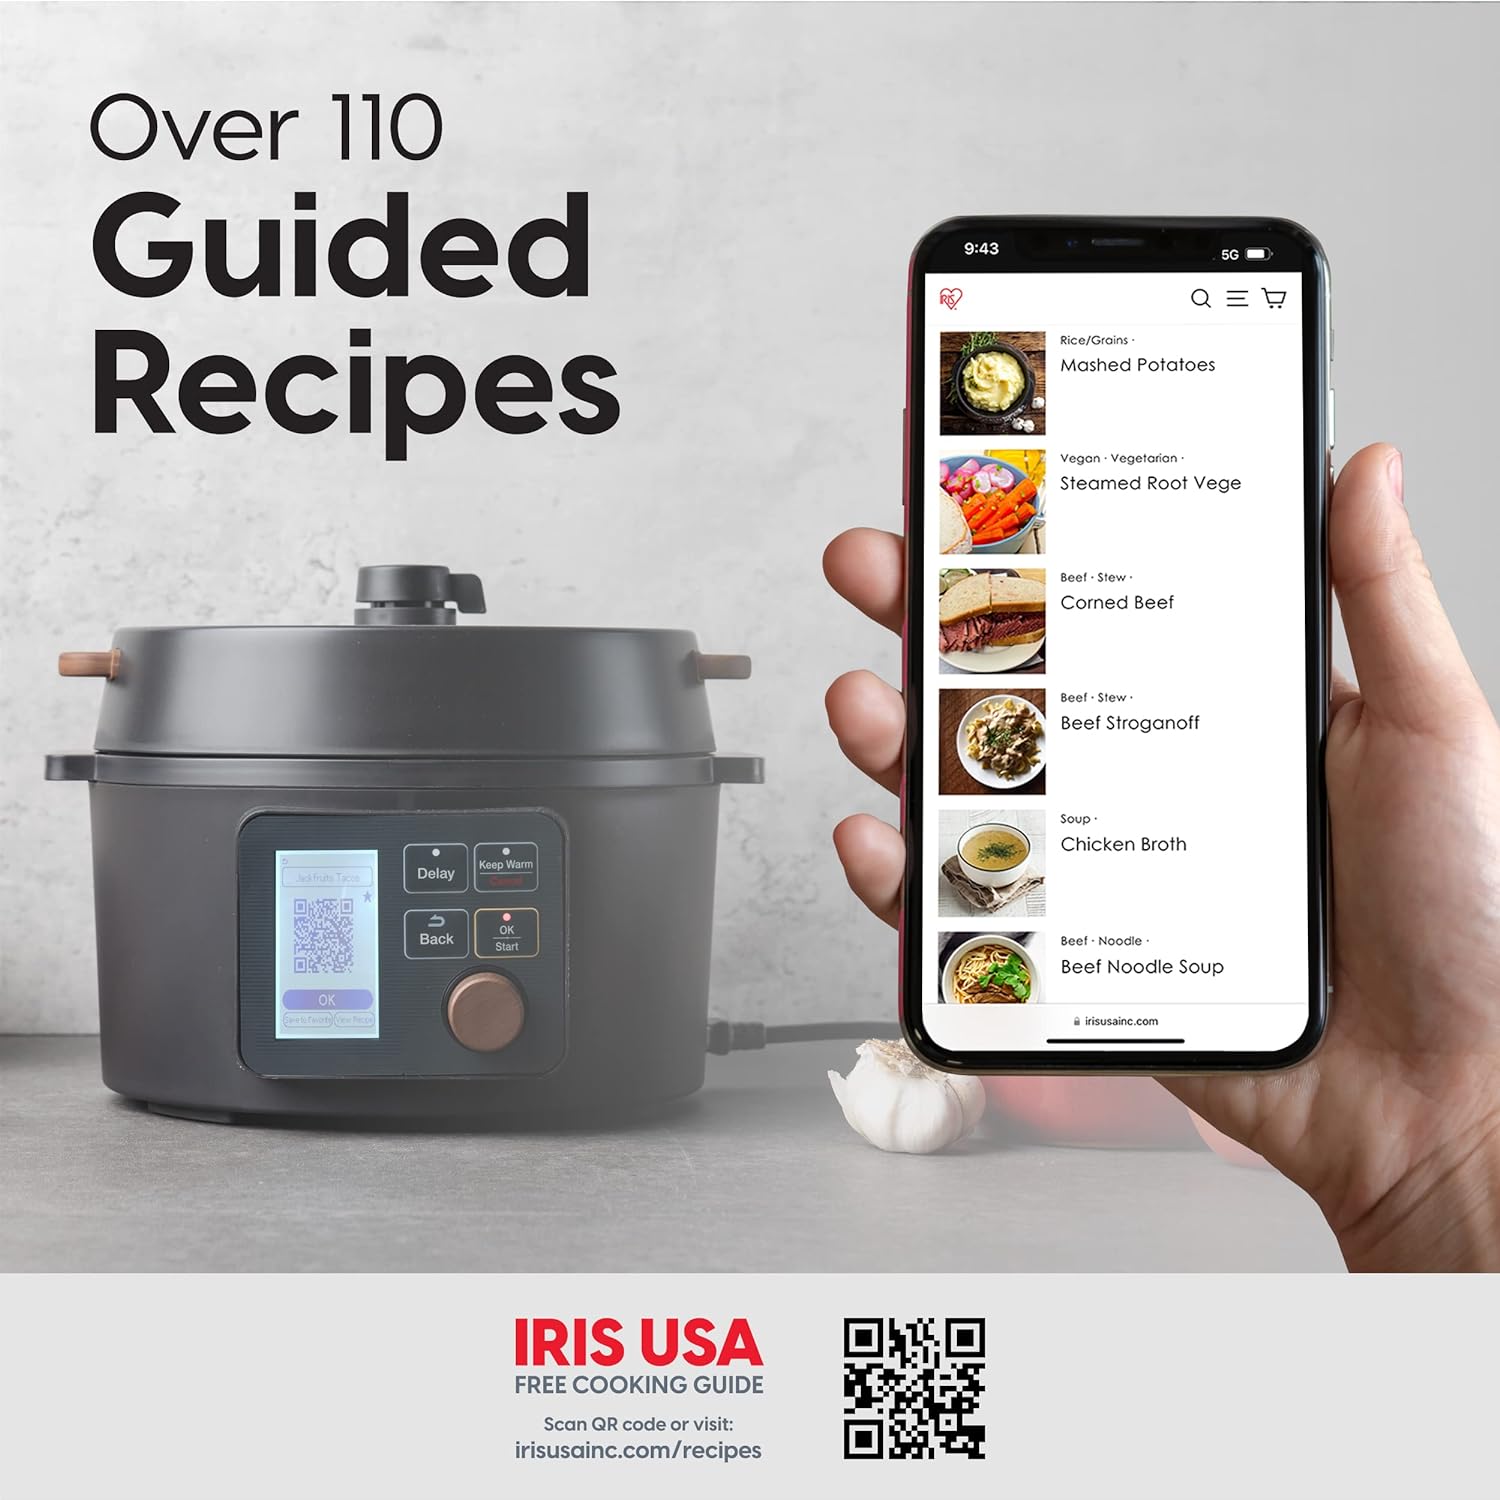 IRIS USA Pressure Rice Cooker Japanese 3 Qt. and 8-in-1 Electric Pressure Cooker, Slow Cooker, Rice Cooker, Steamer, Sear & Sauté, for 2-3 People with Over 110 Pre-Programmed Recipes, Black